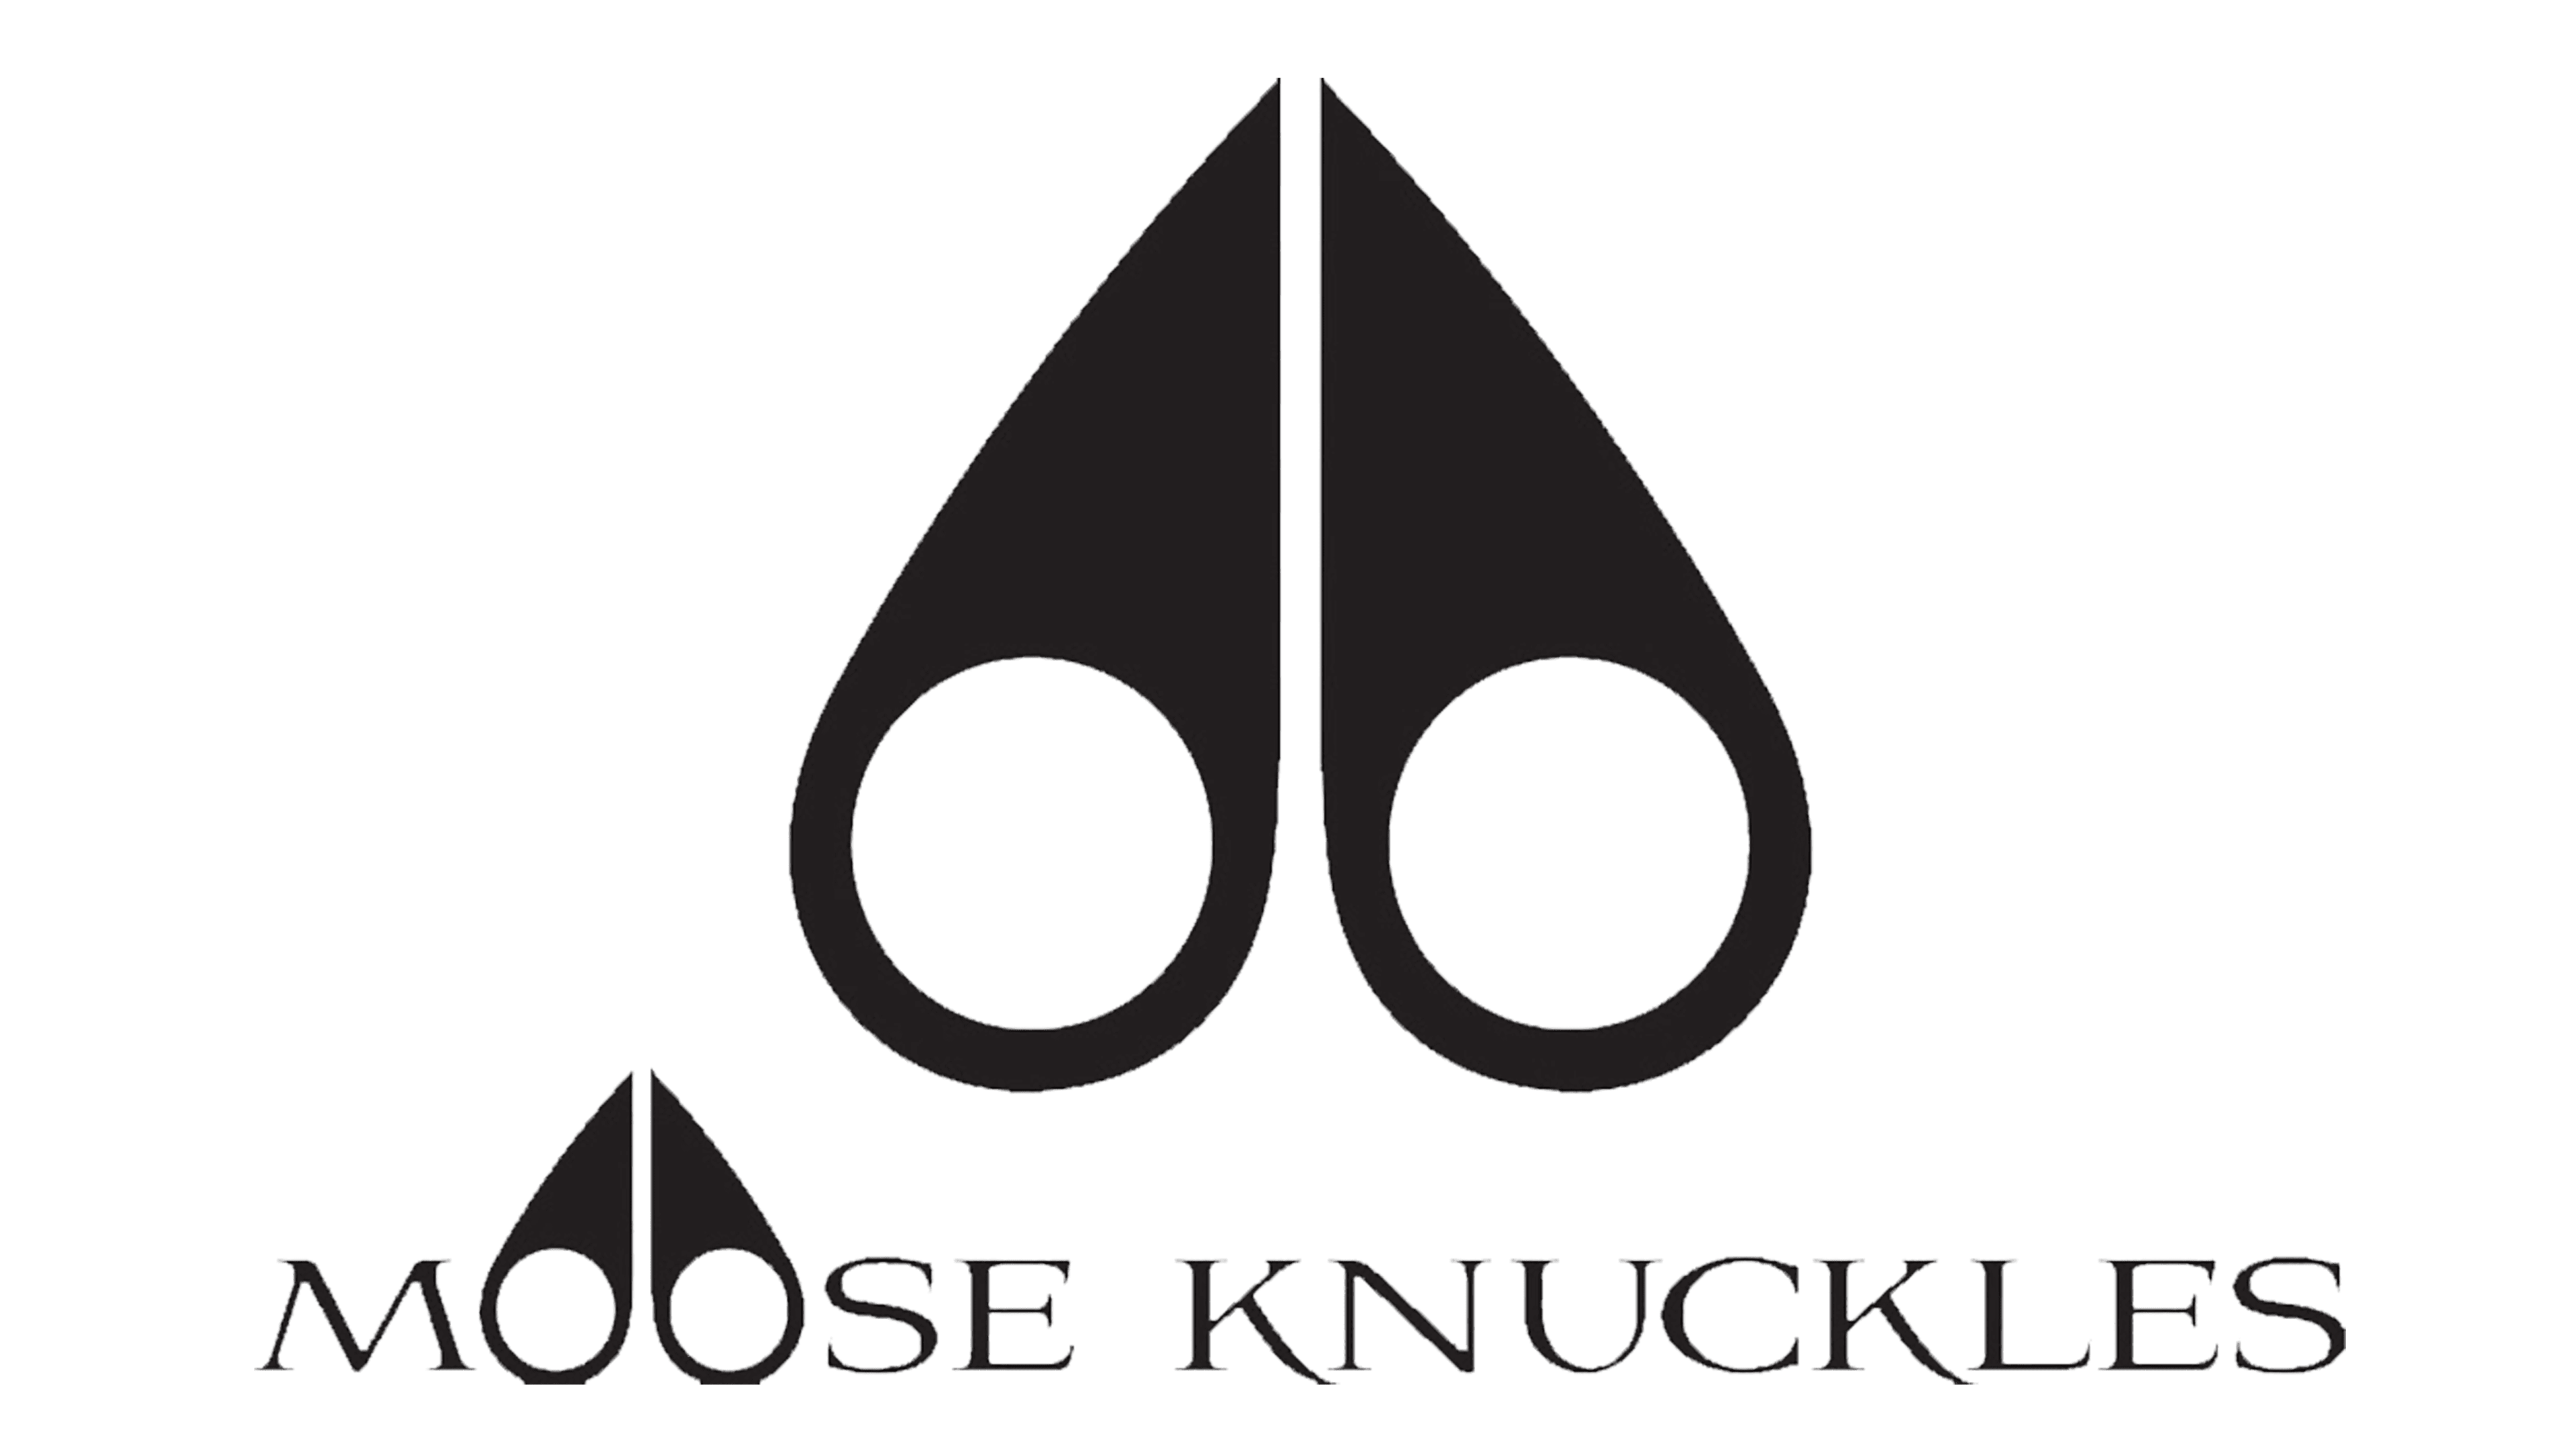 Moose knuckles logo meaning